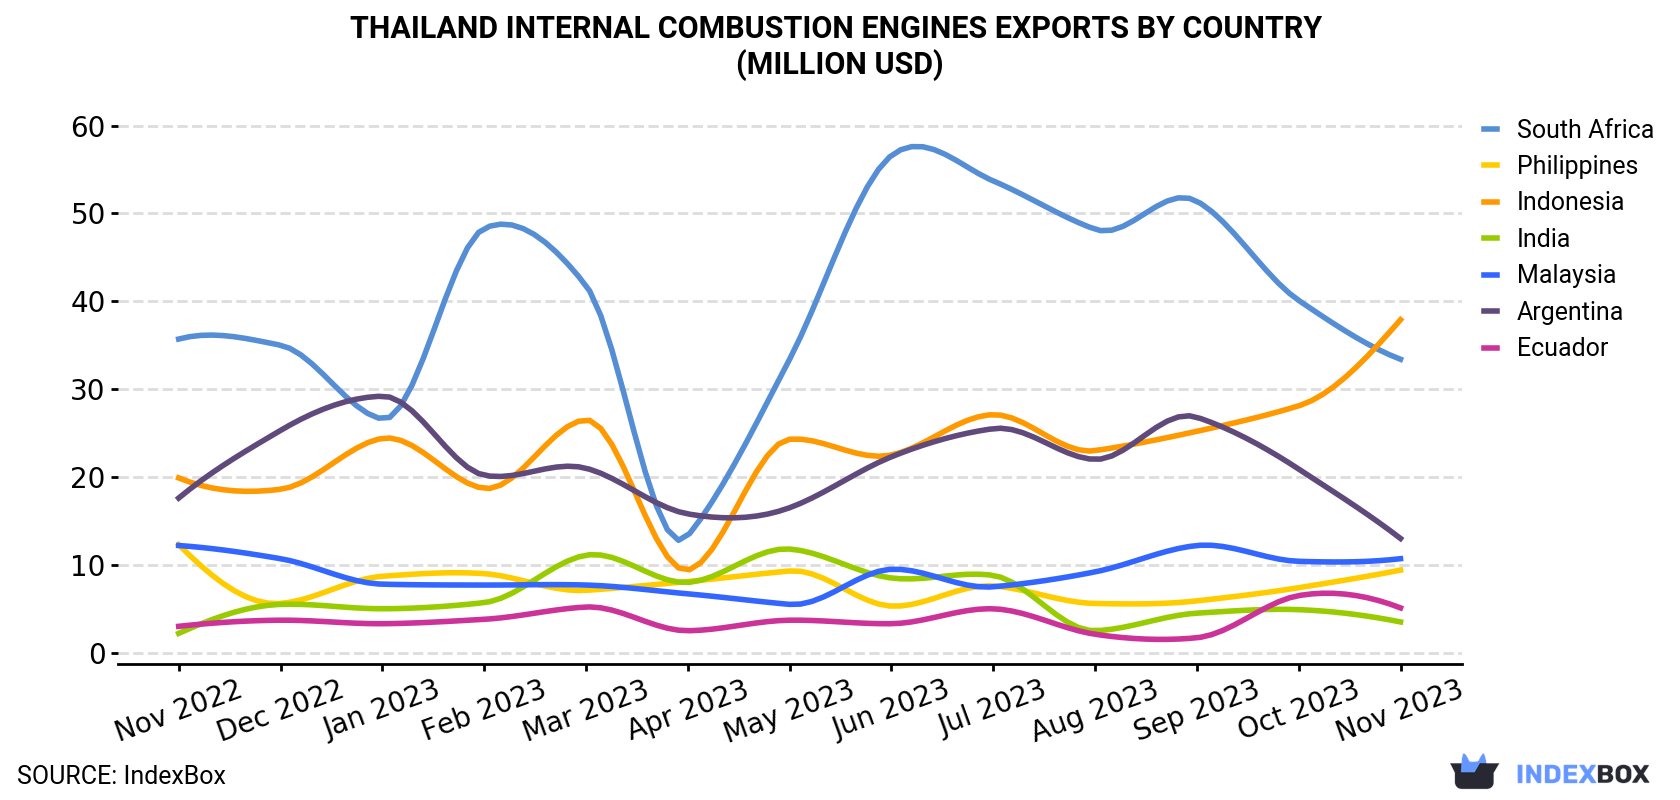 Thailand Internal Combustion Engines Exports By Country (Million USD)